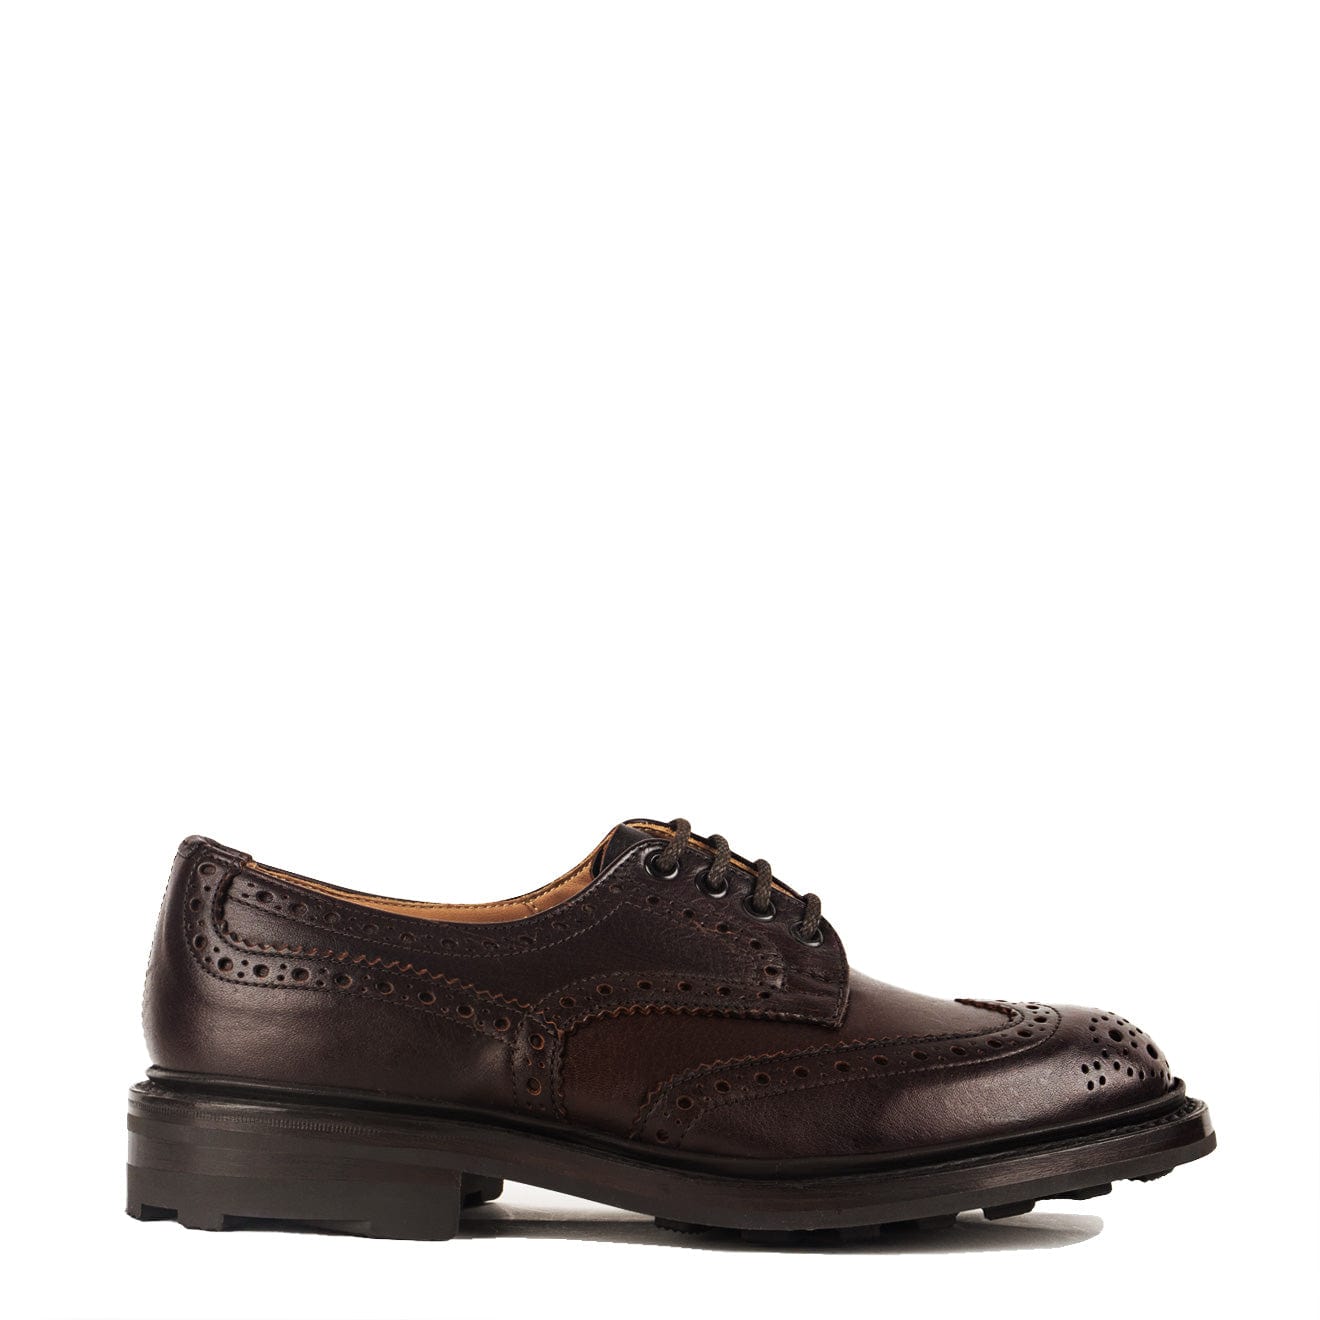 Trickers Bourton Country Shoe Snuff Kudu | The Sporting Lodge